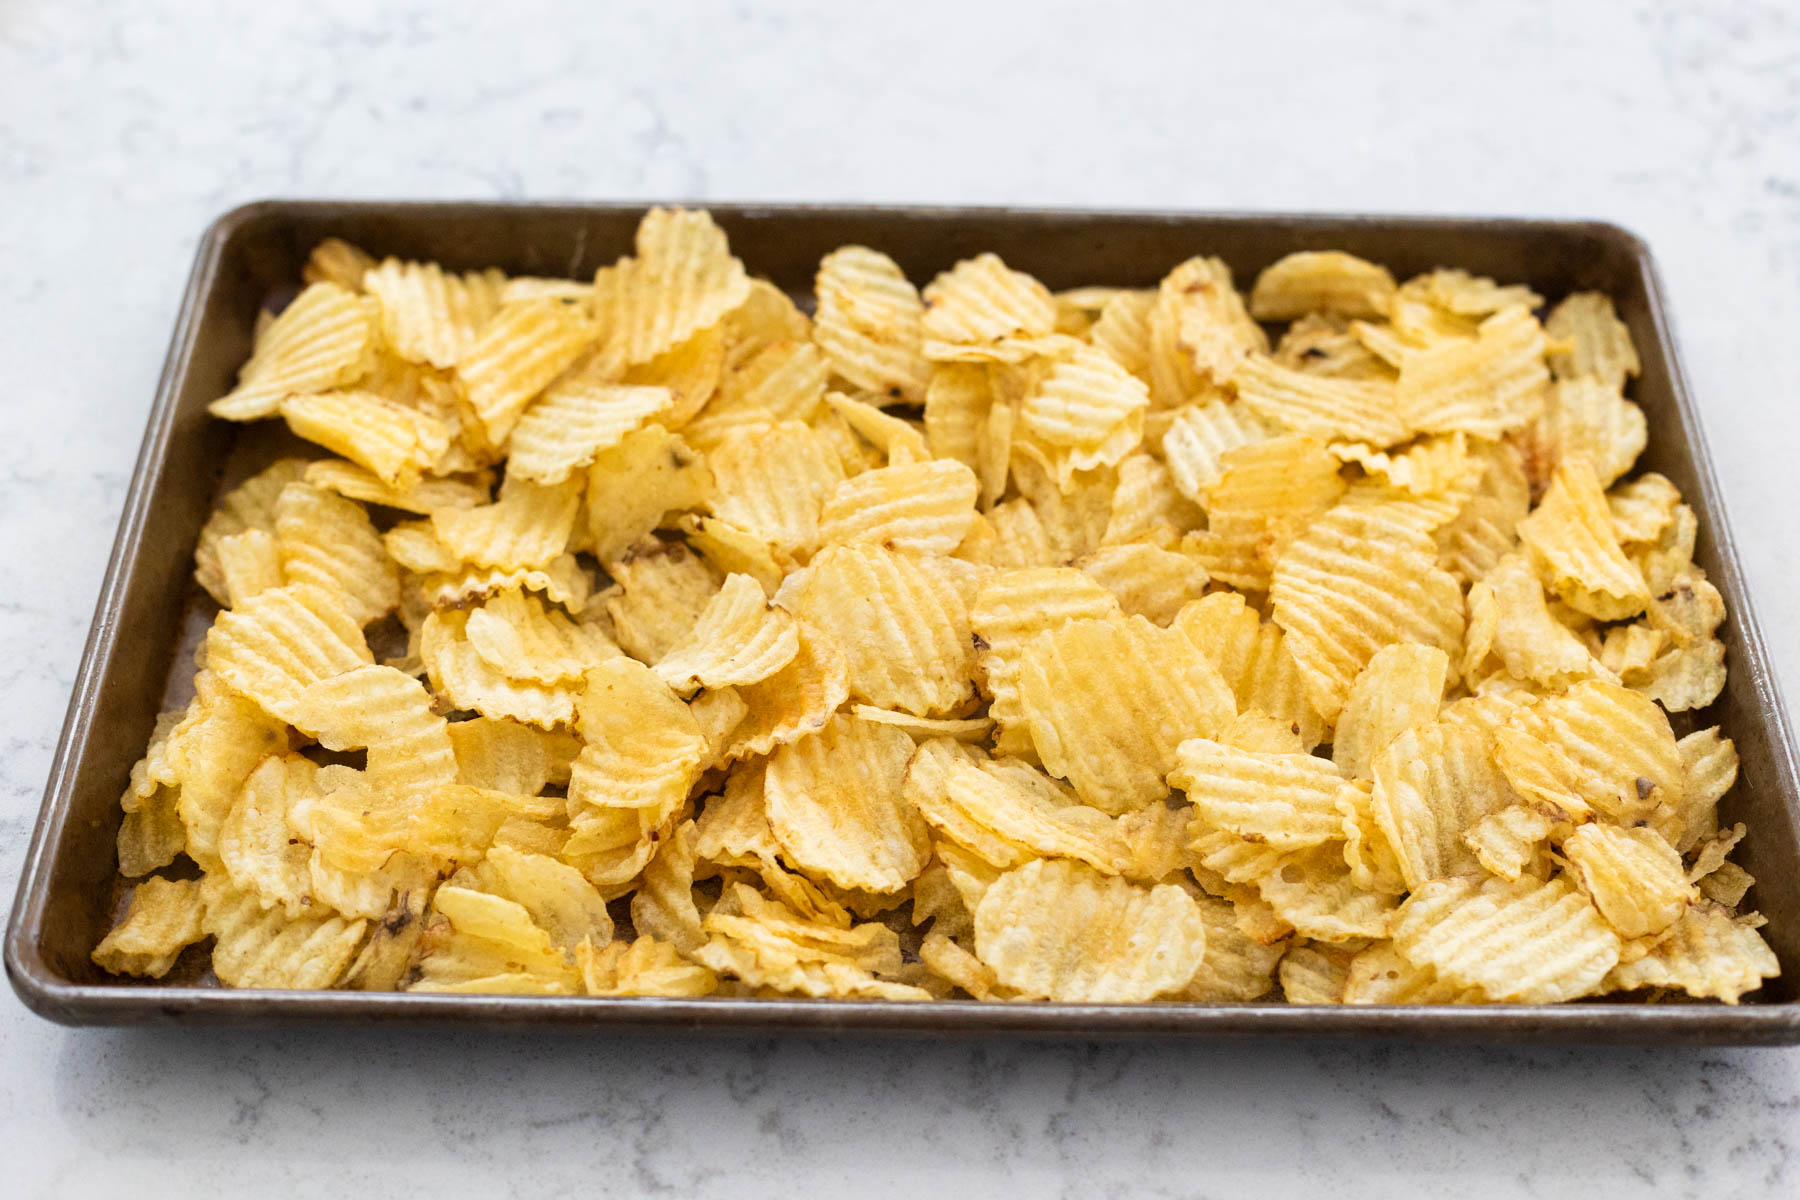 The kettle chips have been spread in an even layer on a large baking sheet.